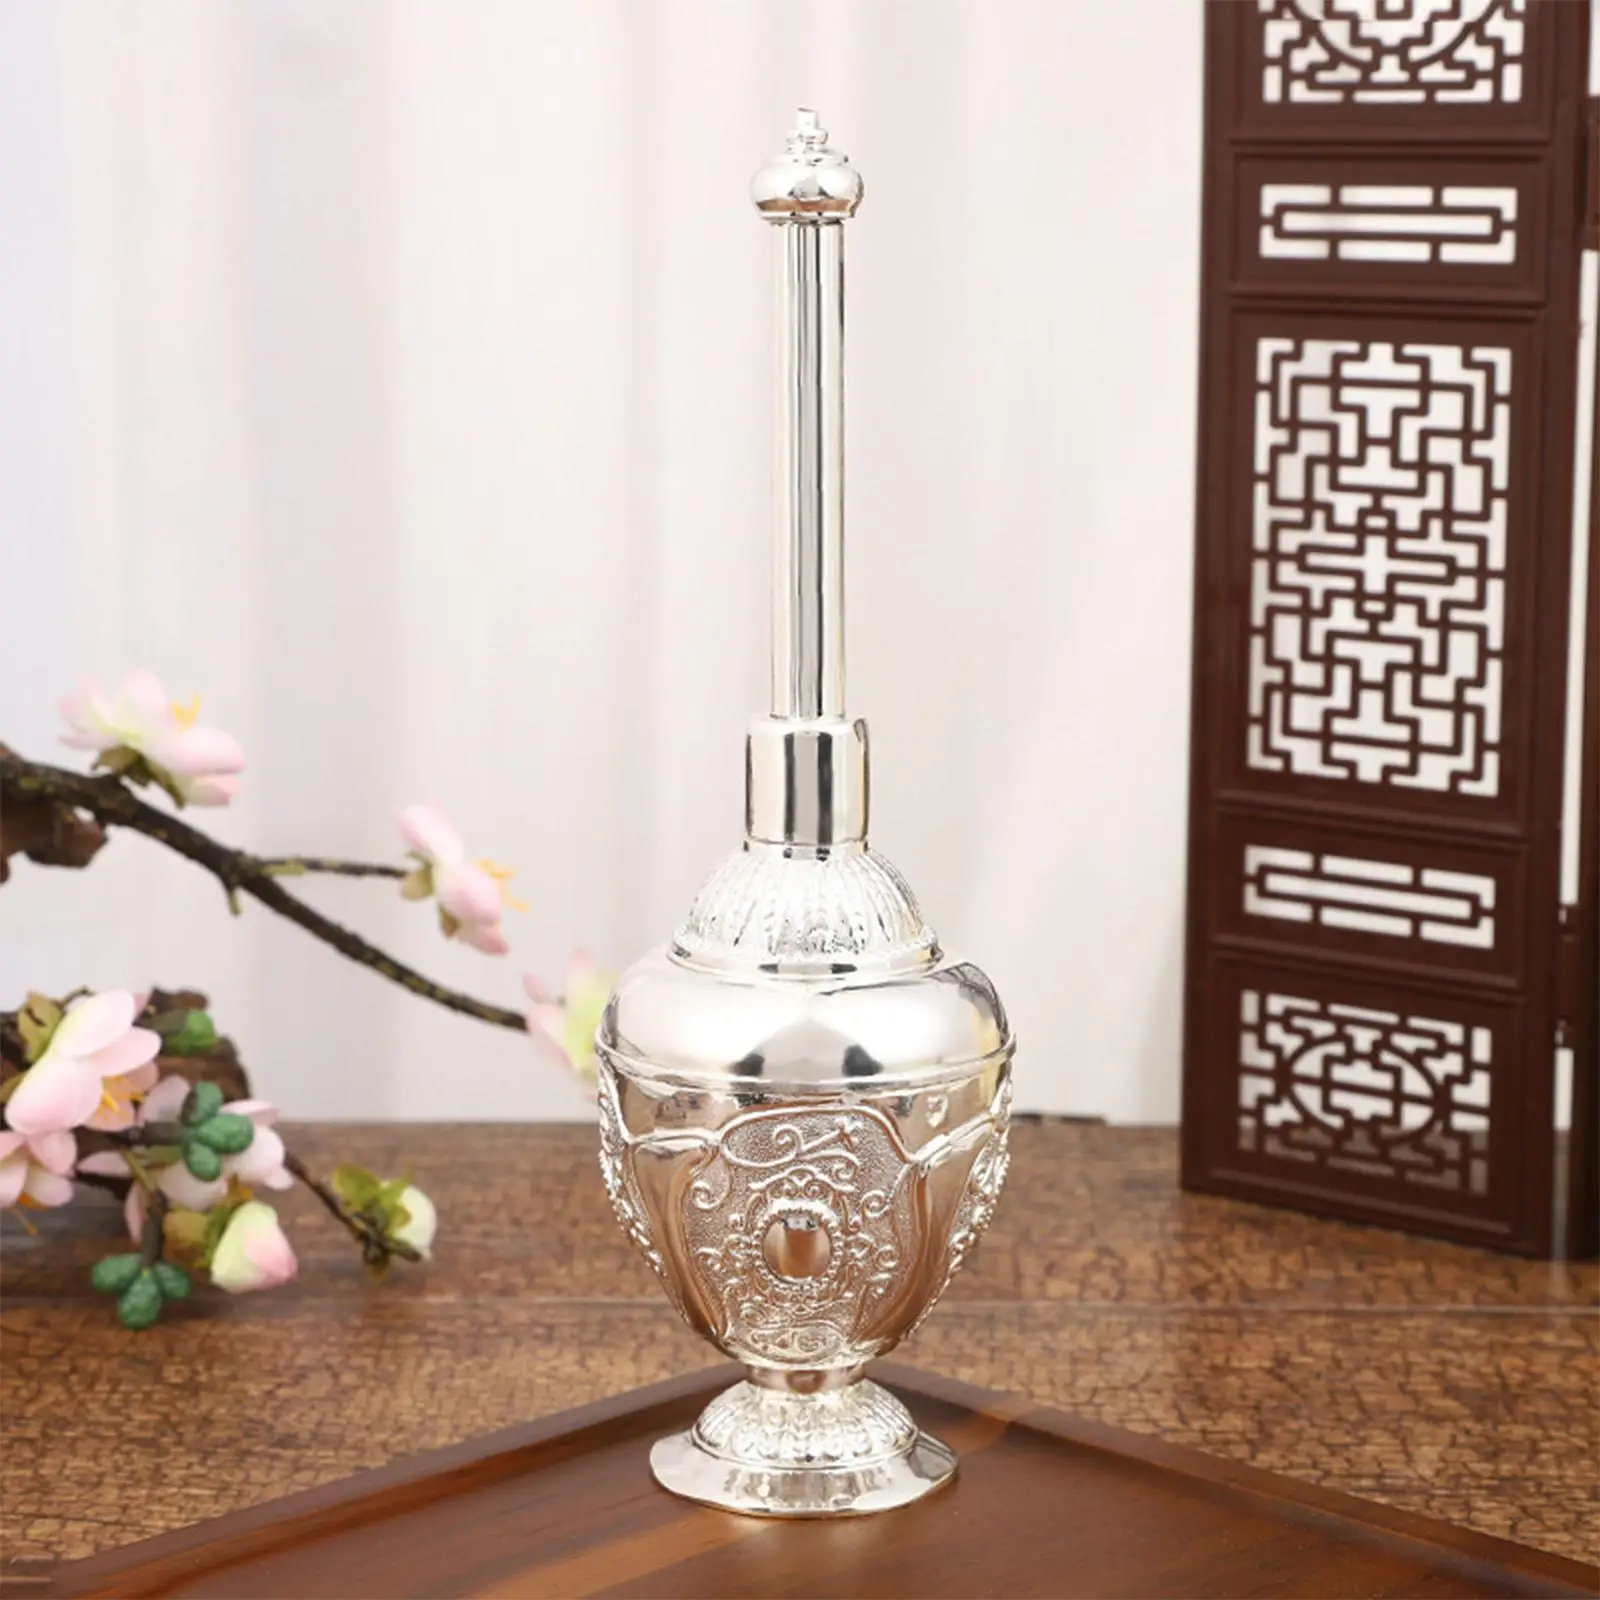 Tea Canister 8.66``high Ornament Metal with Lid Decorative Tabletop Flower Vase for Wedding Kitchen Home Living Room Dining Room